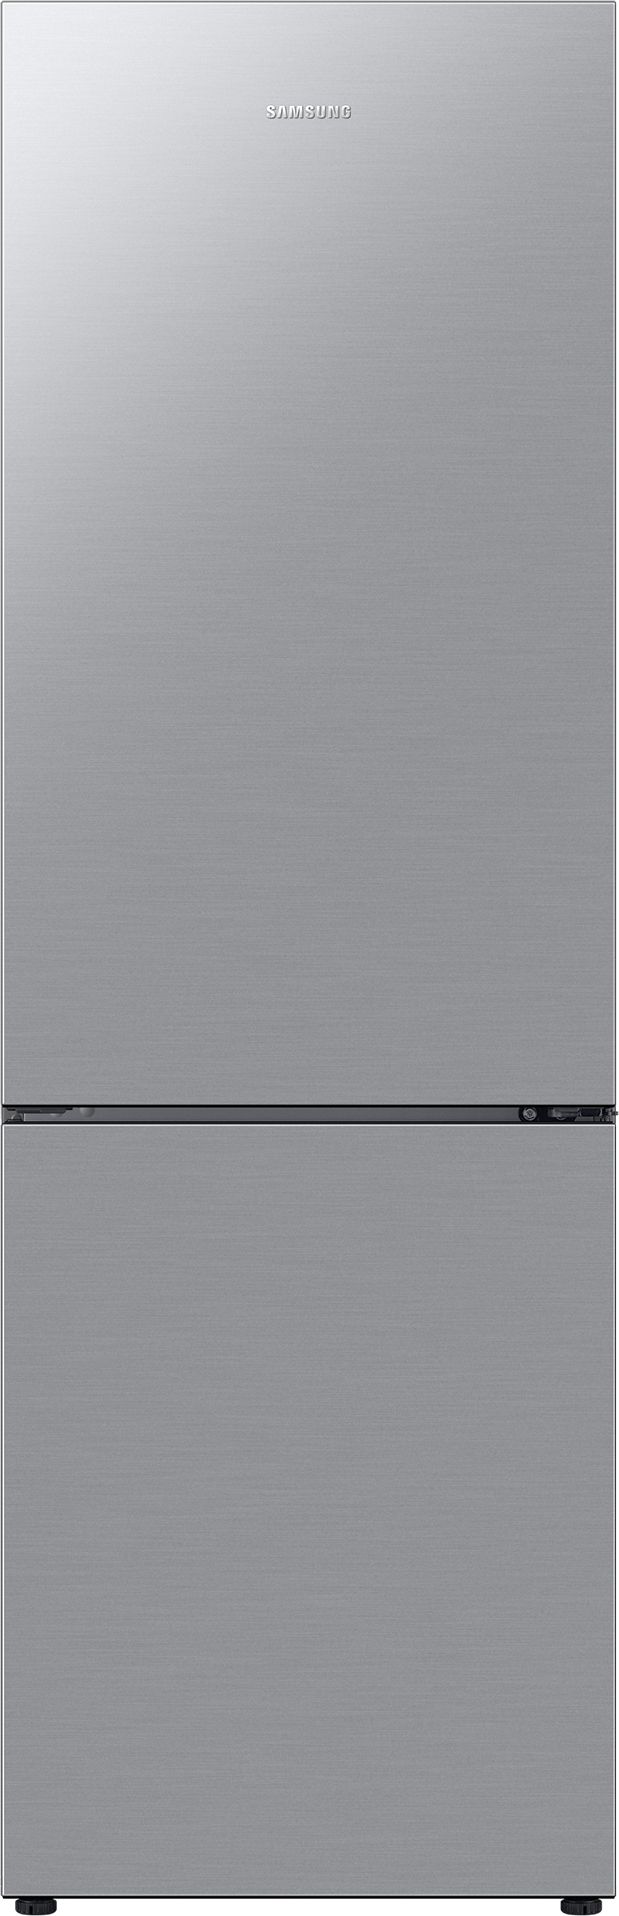 Samsung RB33B610ESA 70/30 No Frost Fridge Freezer - Silver - E Rated, Silver